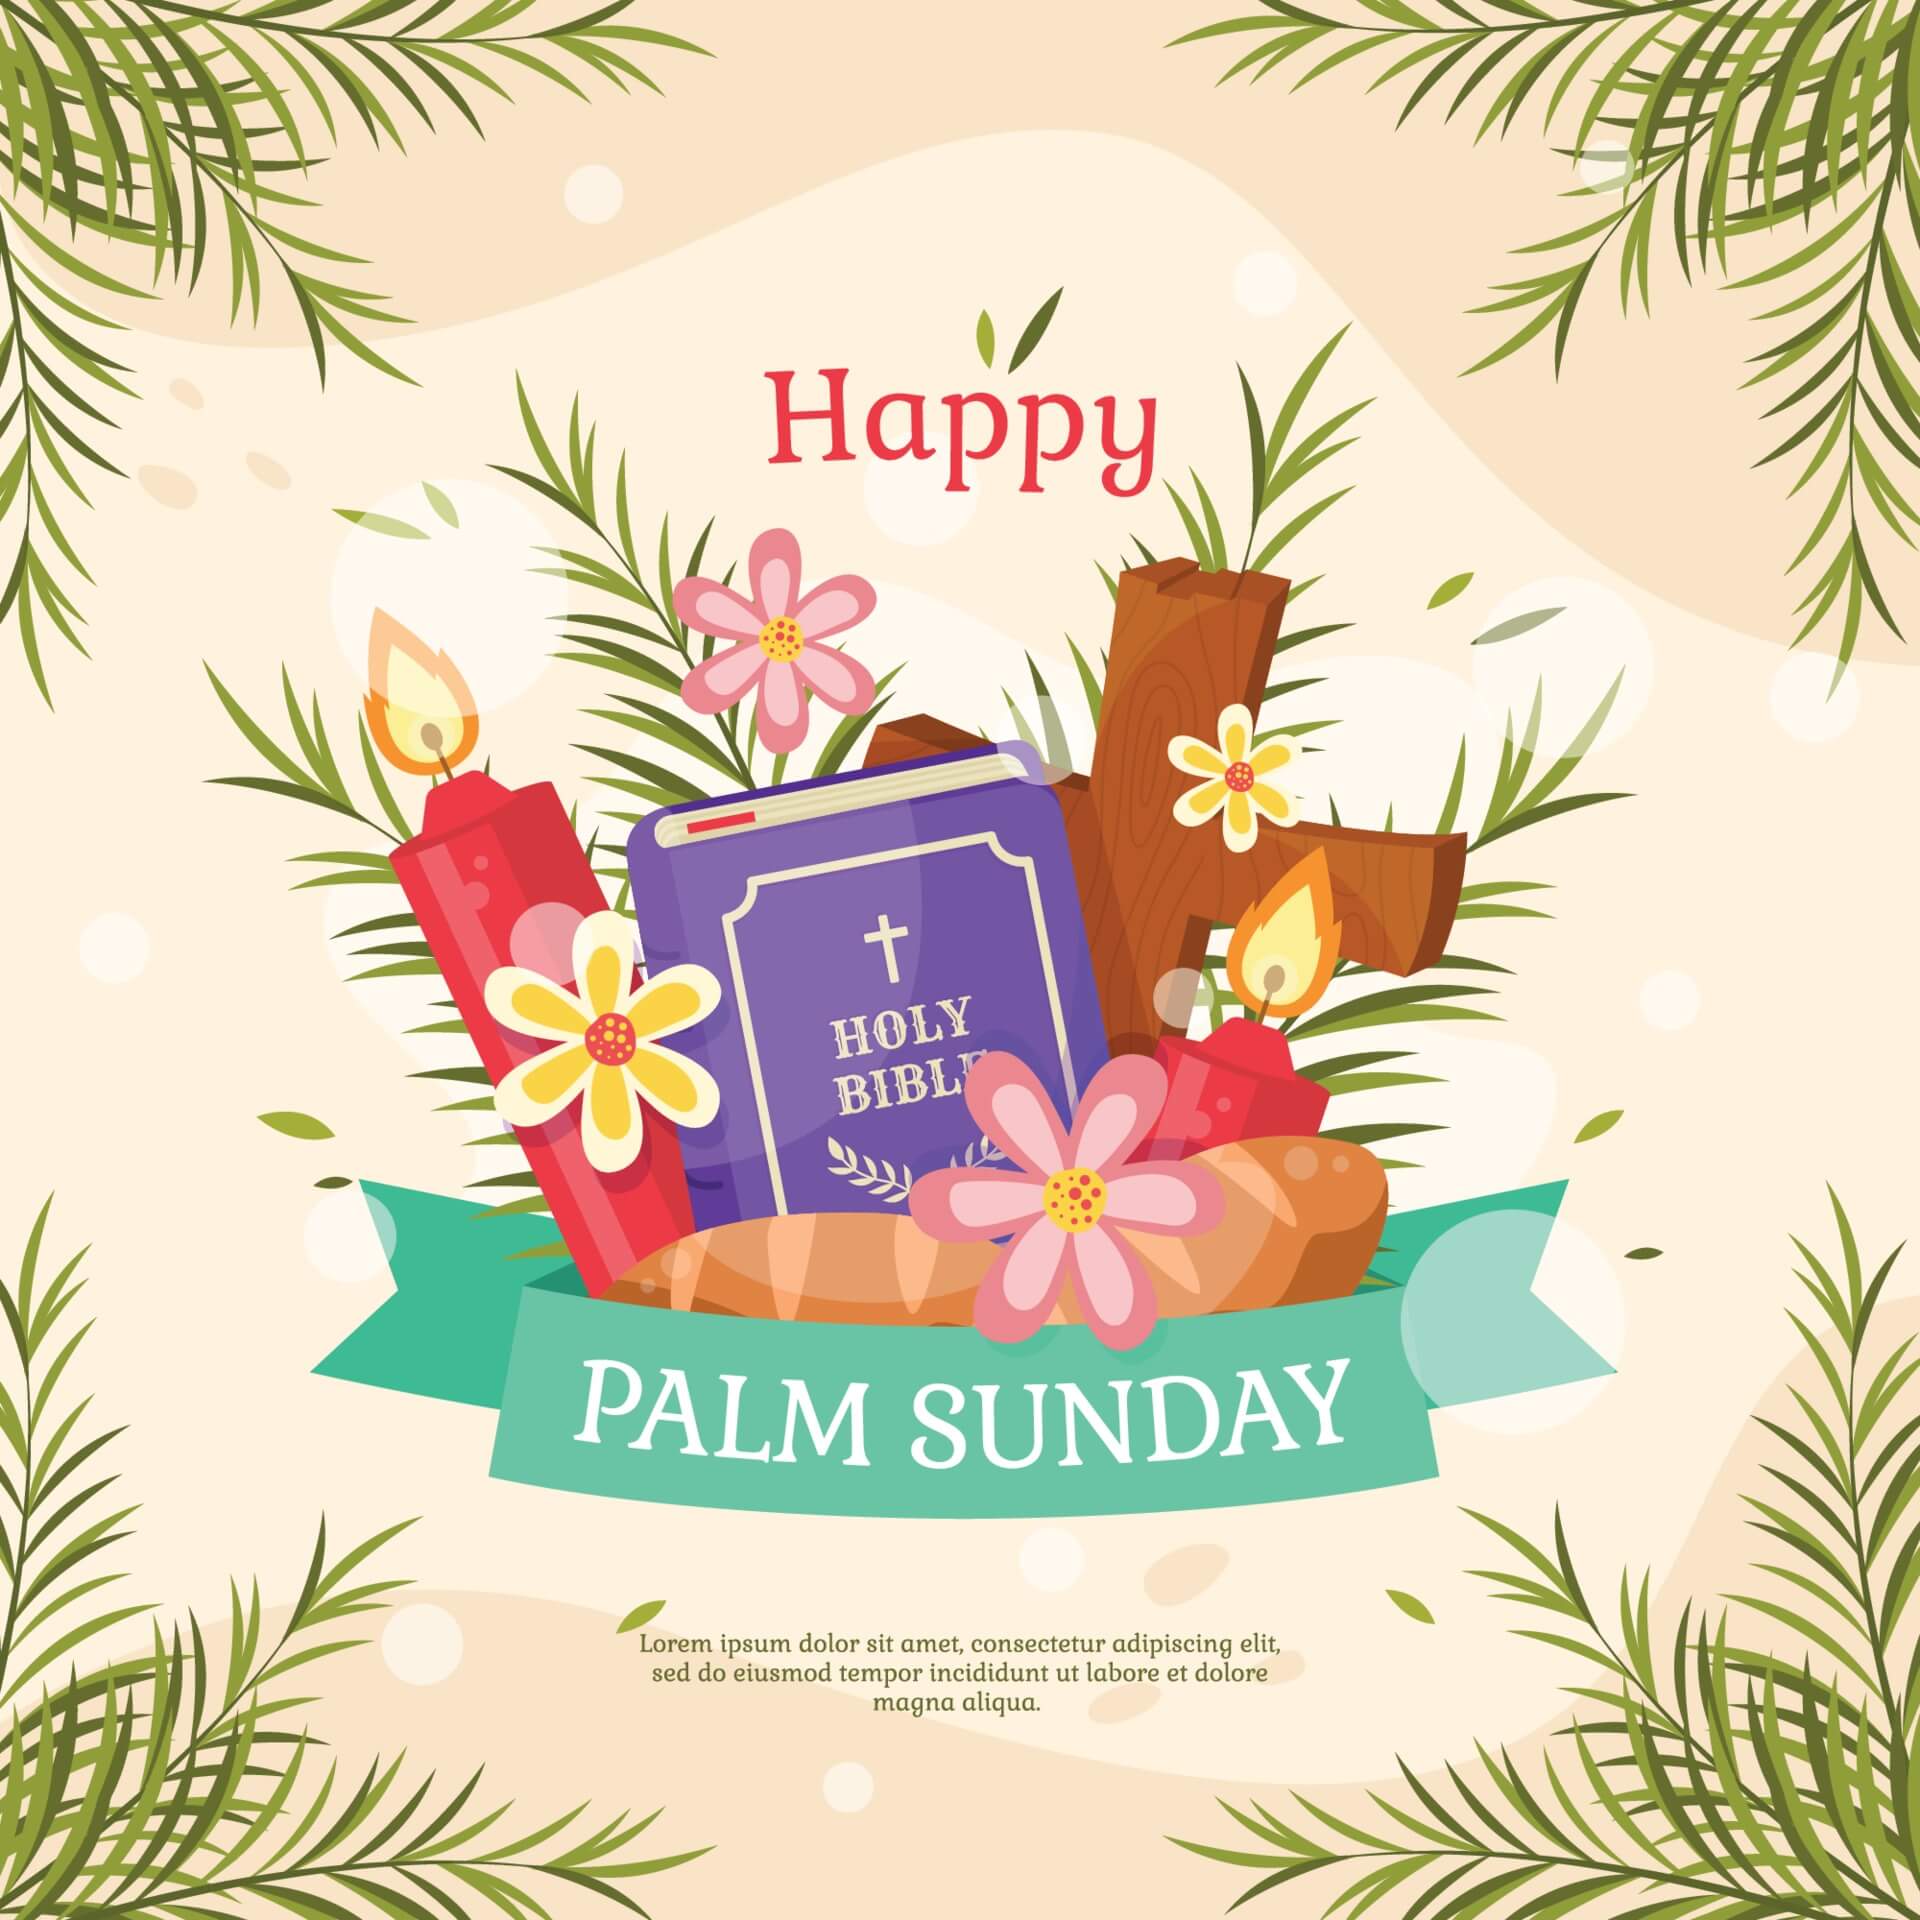 Palm Sunday Quotes and Messages